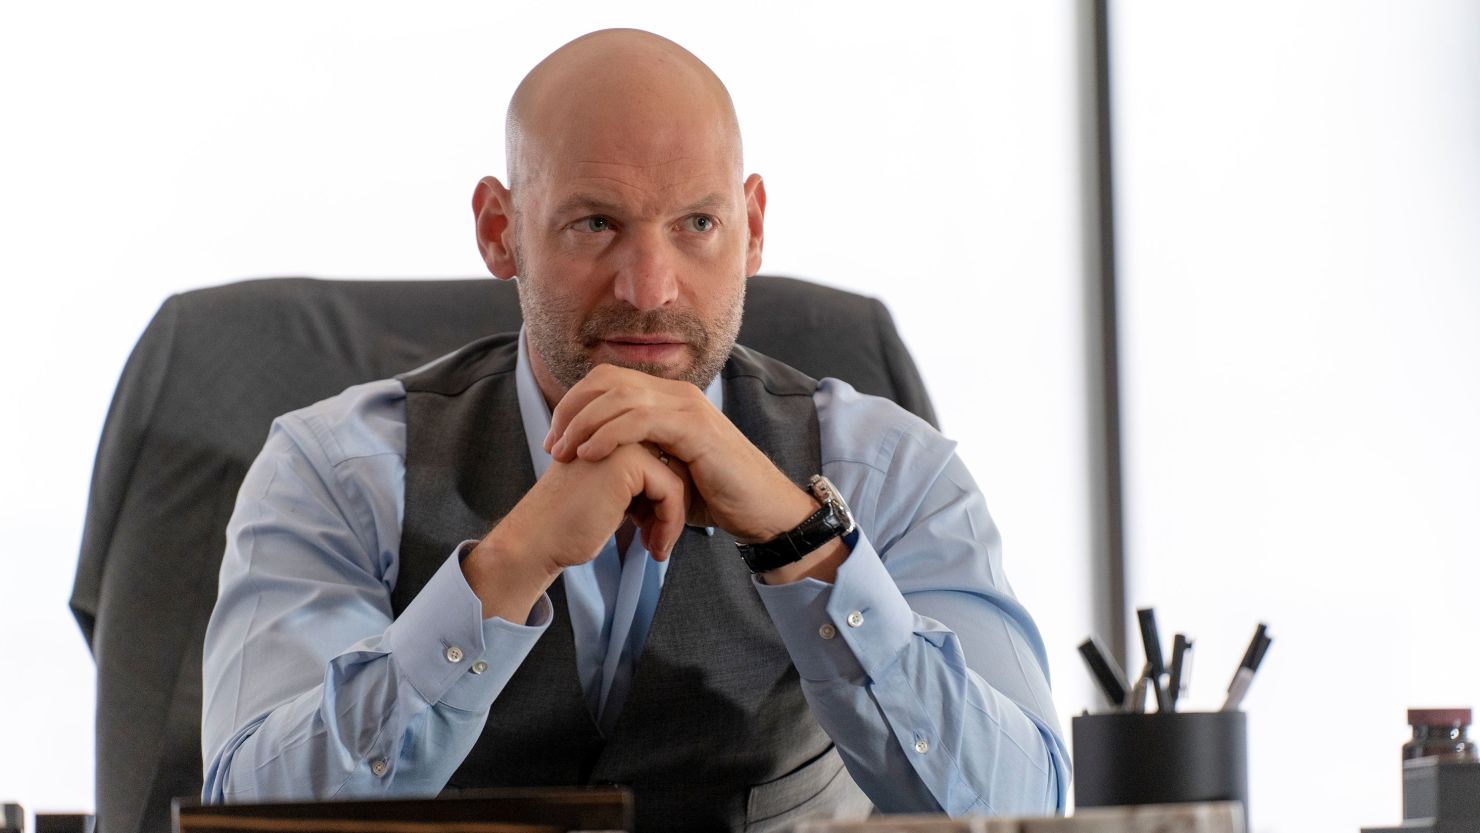 Corey Stoll as Michael "Mike" Prince in BILLIONS, "Cannonade".  Photo credit: Jeff Neumann/SHOWTIME.